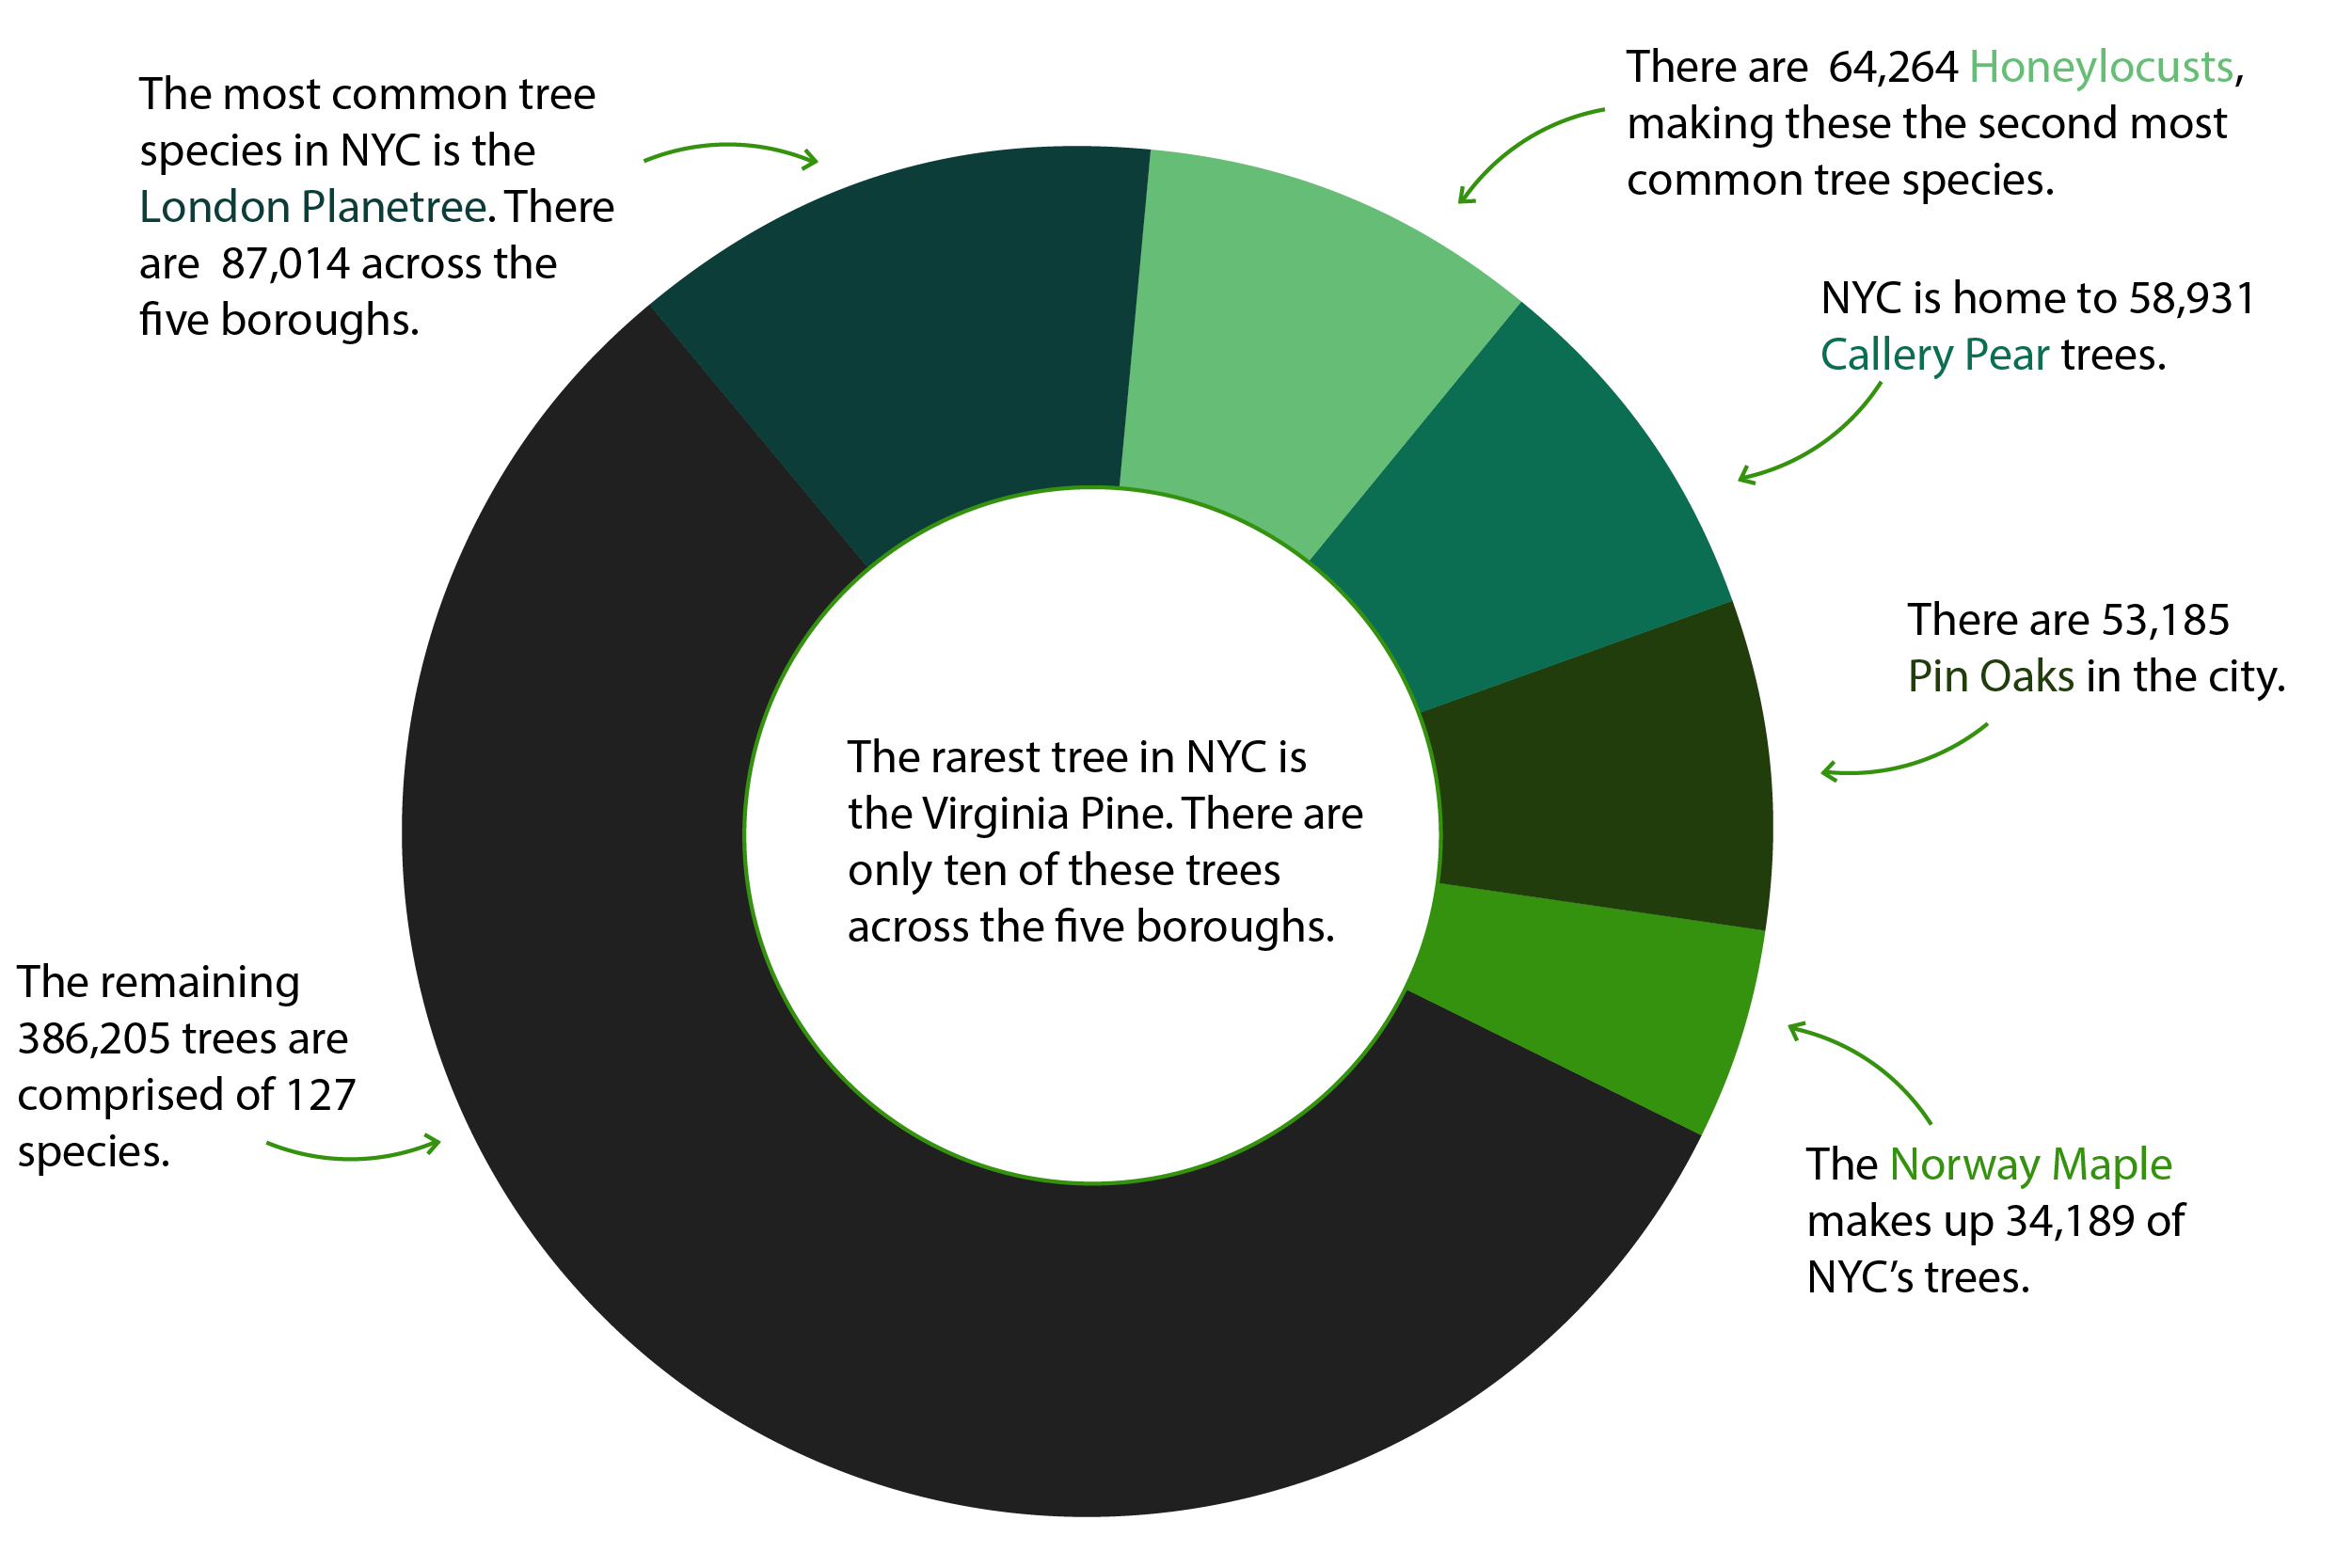 A doughnut chart of NYC's most common tree species.